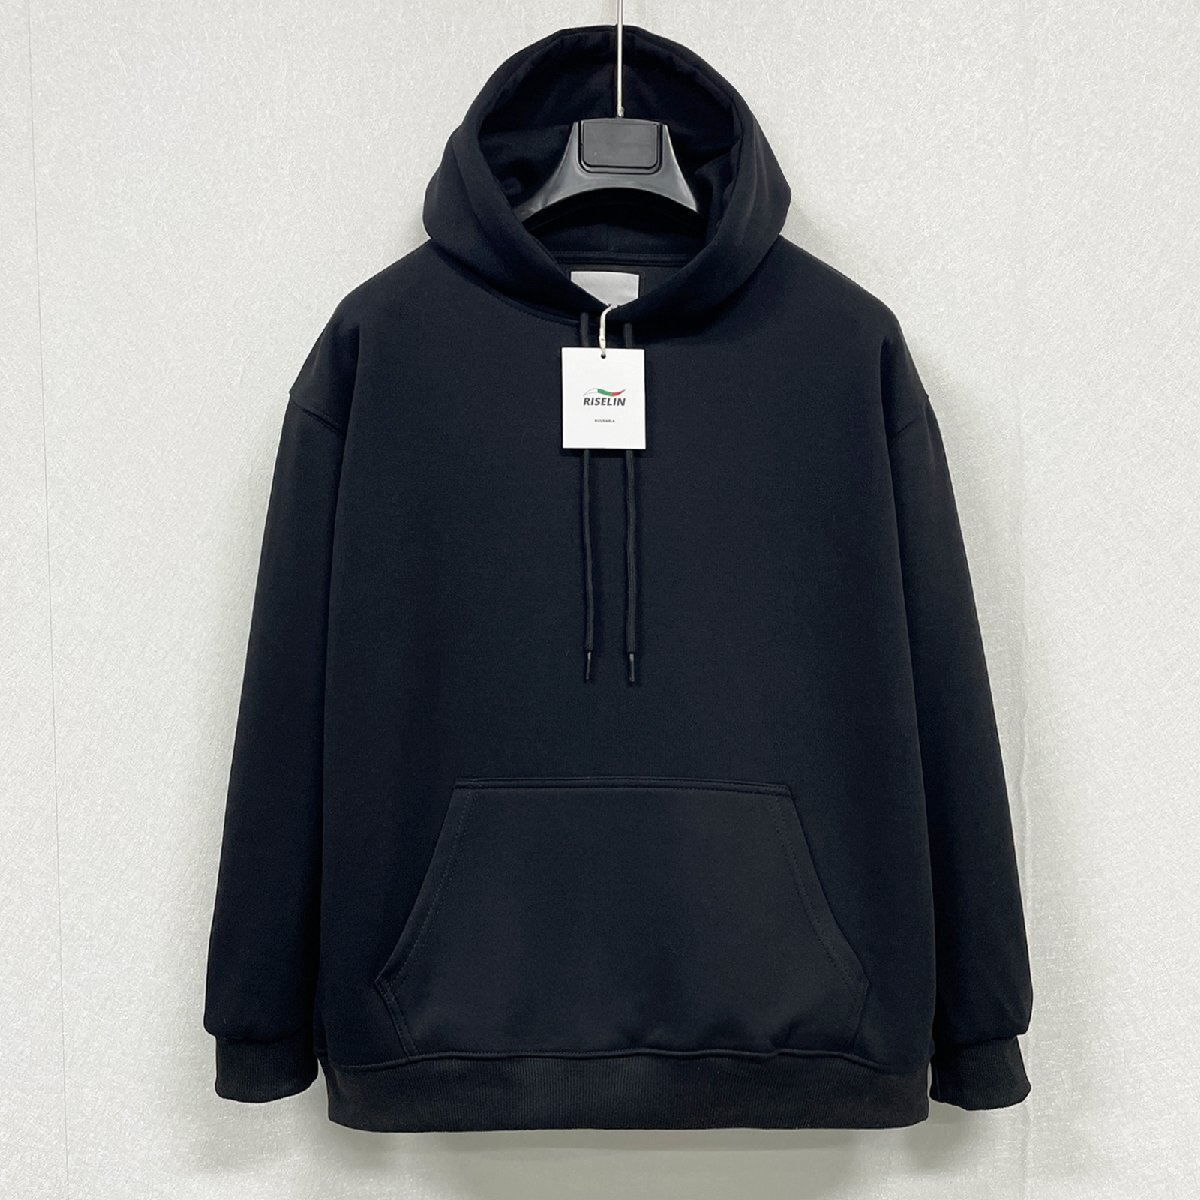  piece . Europe made * regular price 4 ten thousand * BVLGARY a departure *RISELIN Parker soft comfortable pull over tops simple Street usually put on 2XL/52